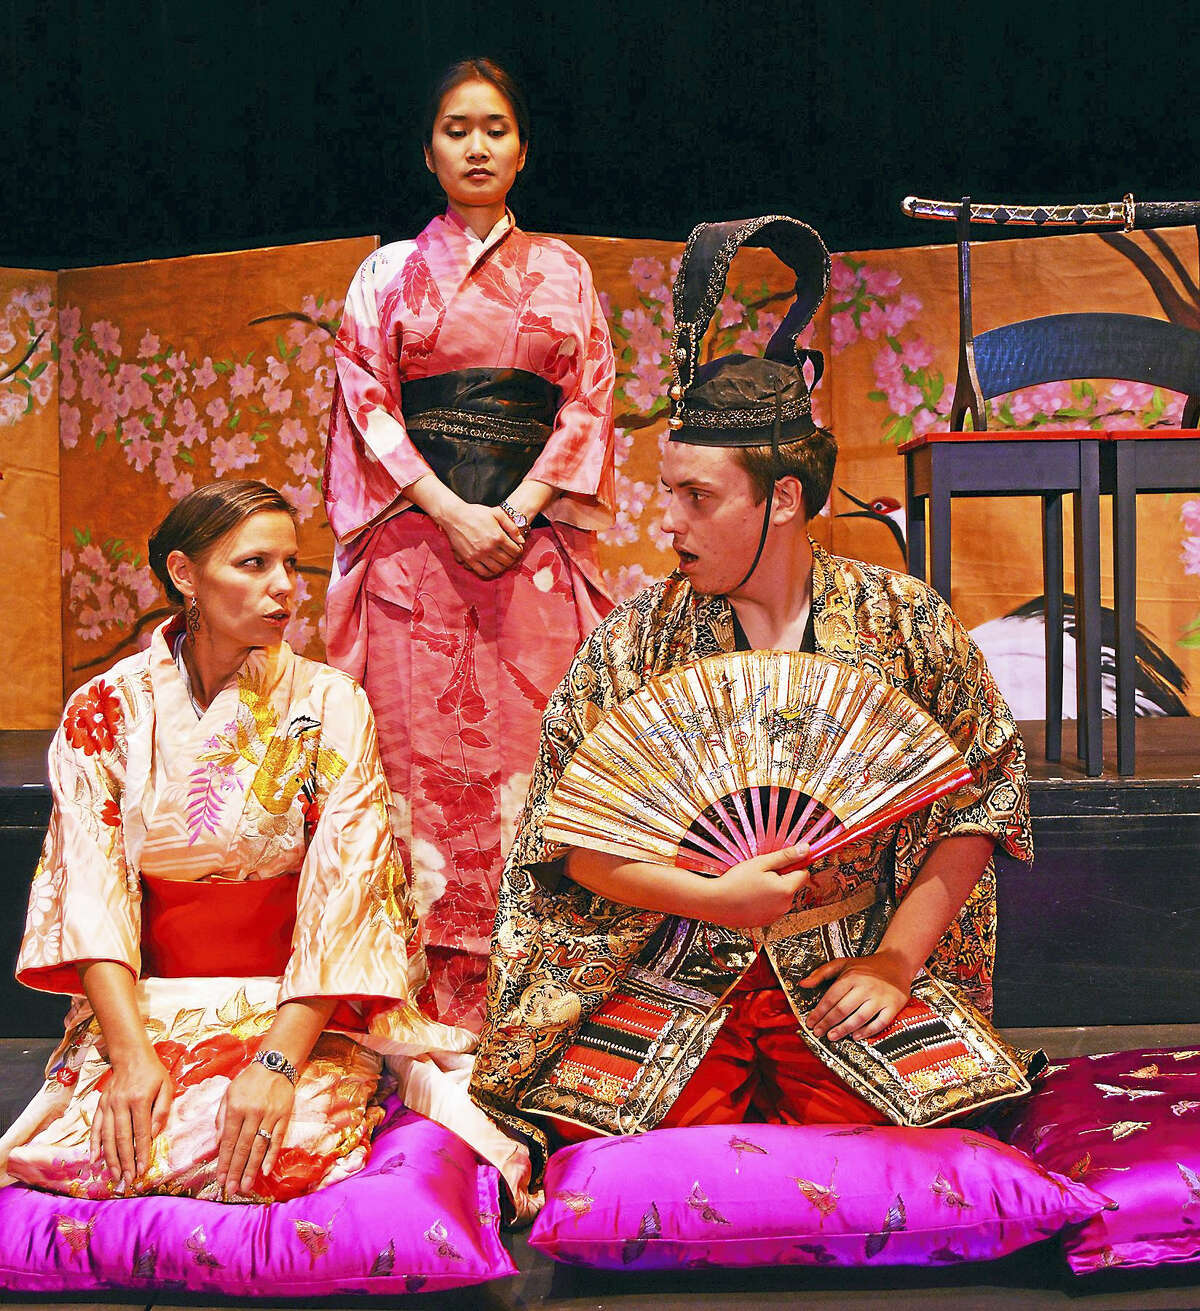 Shannon Kessler Dooley (Madama Butterfly), Evanna Lai (Suzuki), and Zachary Johnson (Prince Yamadori) kneeling, sing and learn the formal use a Japanese fan.